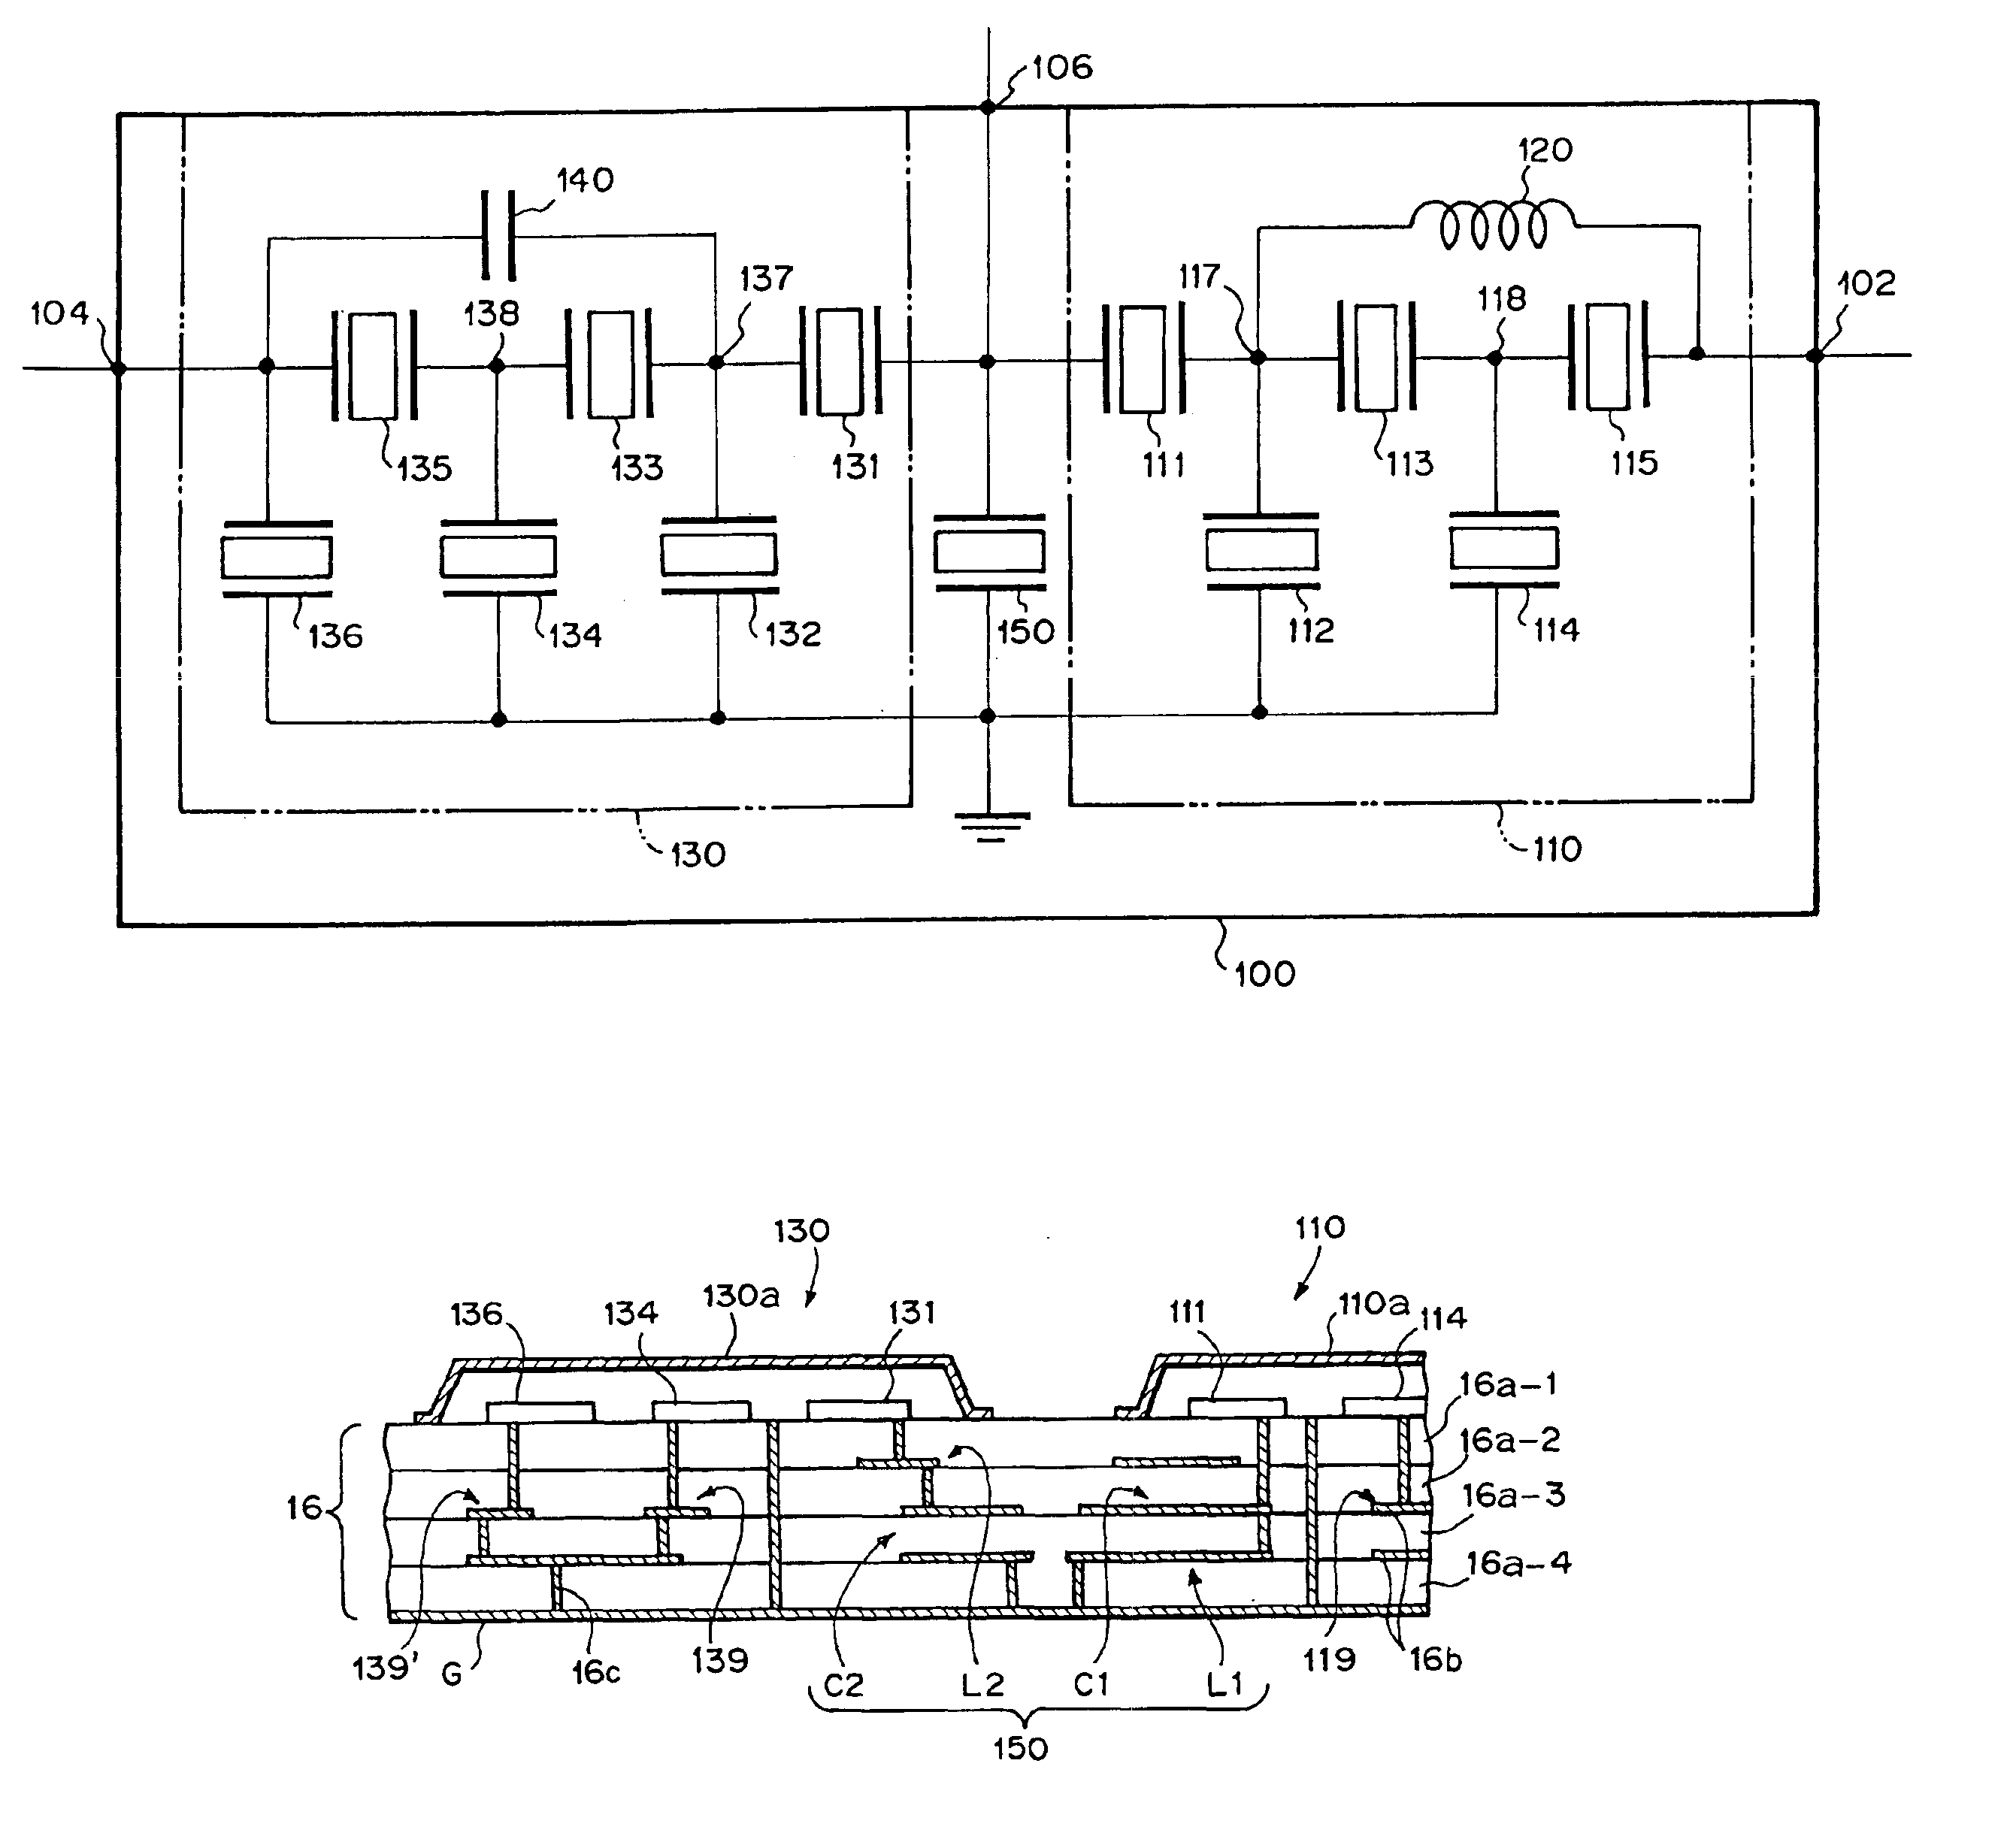 Filter using film bulk acoustic resonator and transmission/reception switch